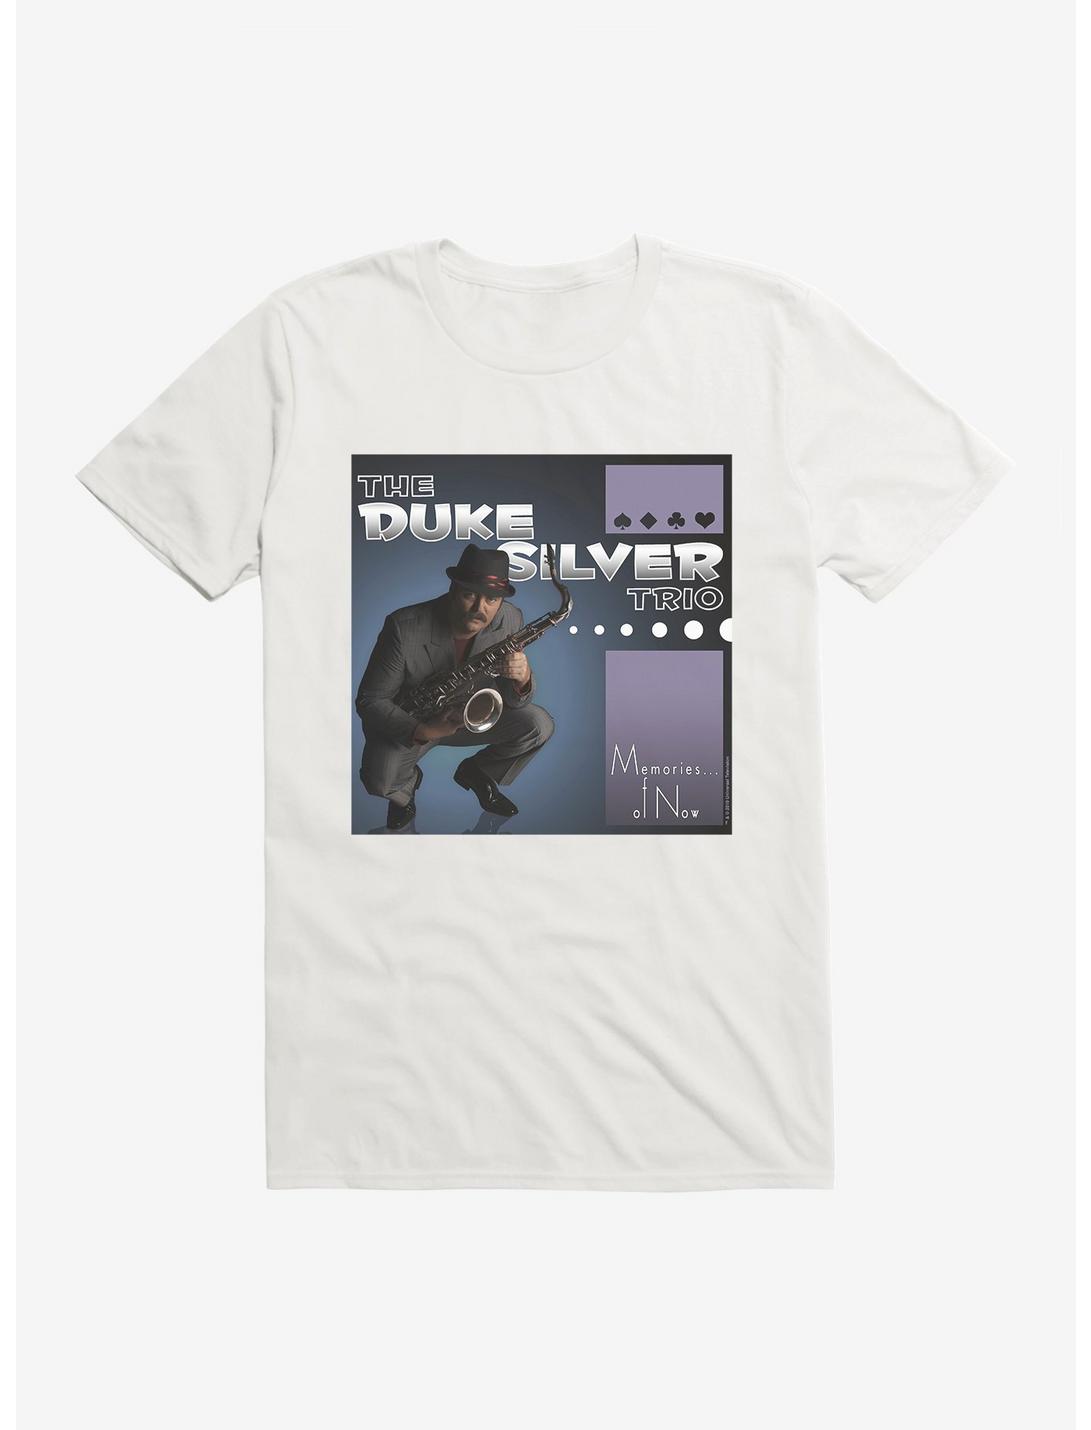 Plus Size Parks And Recreation The Duke Silver Trio CD T-Shirt, , hi-res